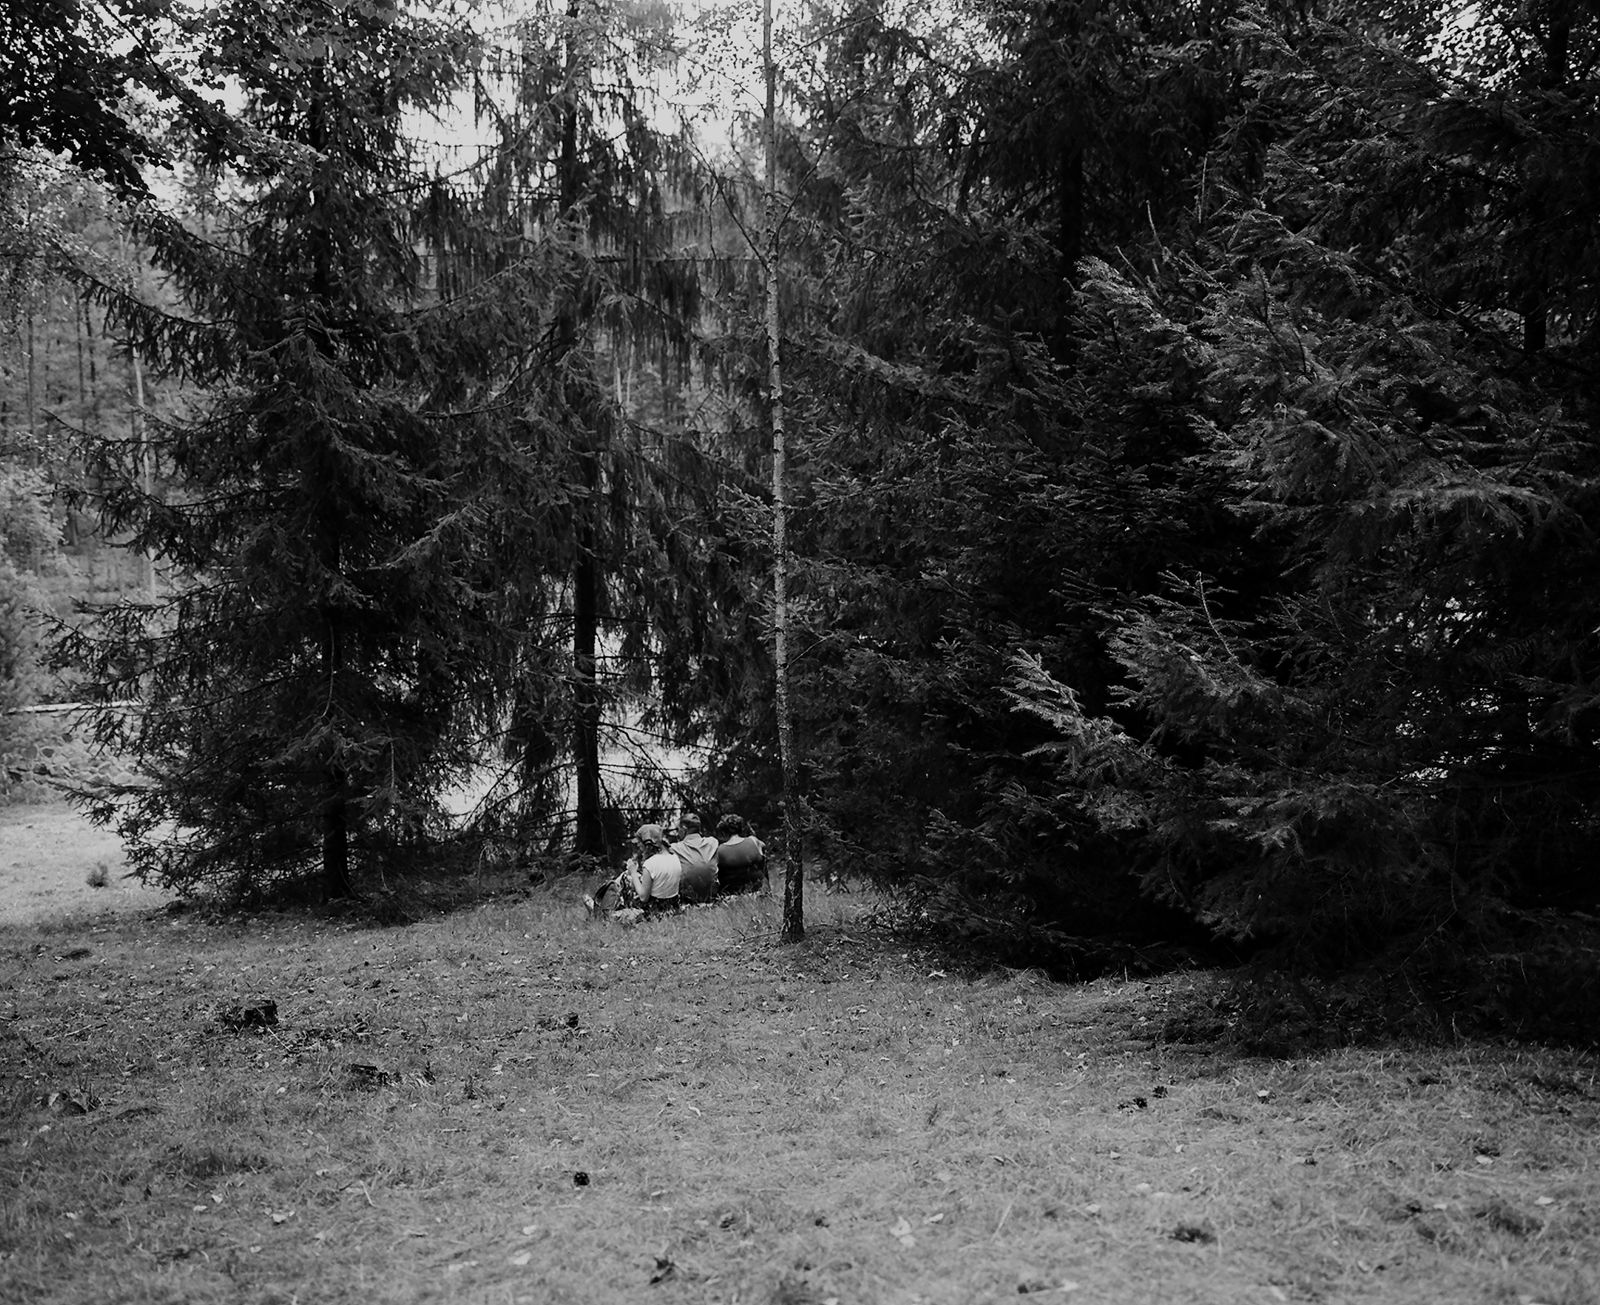 © Monika Orpik - Image from the Neighbours photography project